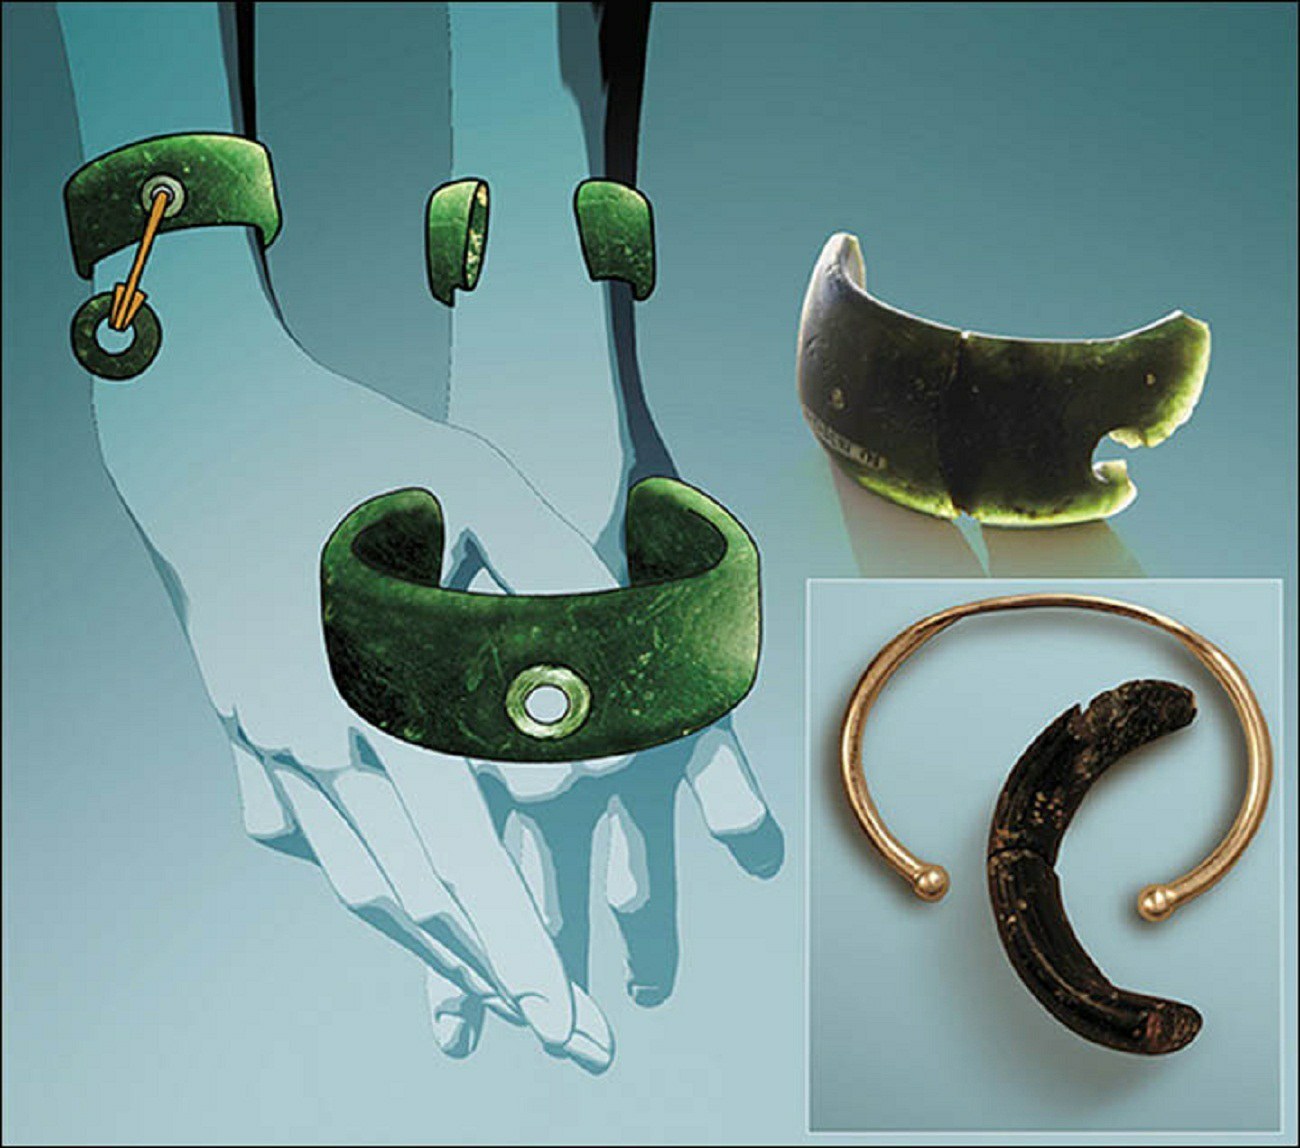 General reconstruction of the view of the bracelet and compraison with the moders bracelet. Pictures: Anatoly Derevyanko and Mikhail Shunkov, Anastasia Abdulmanova